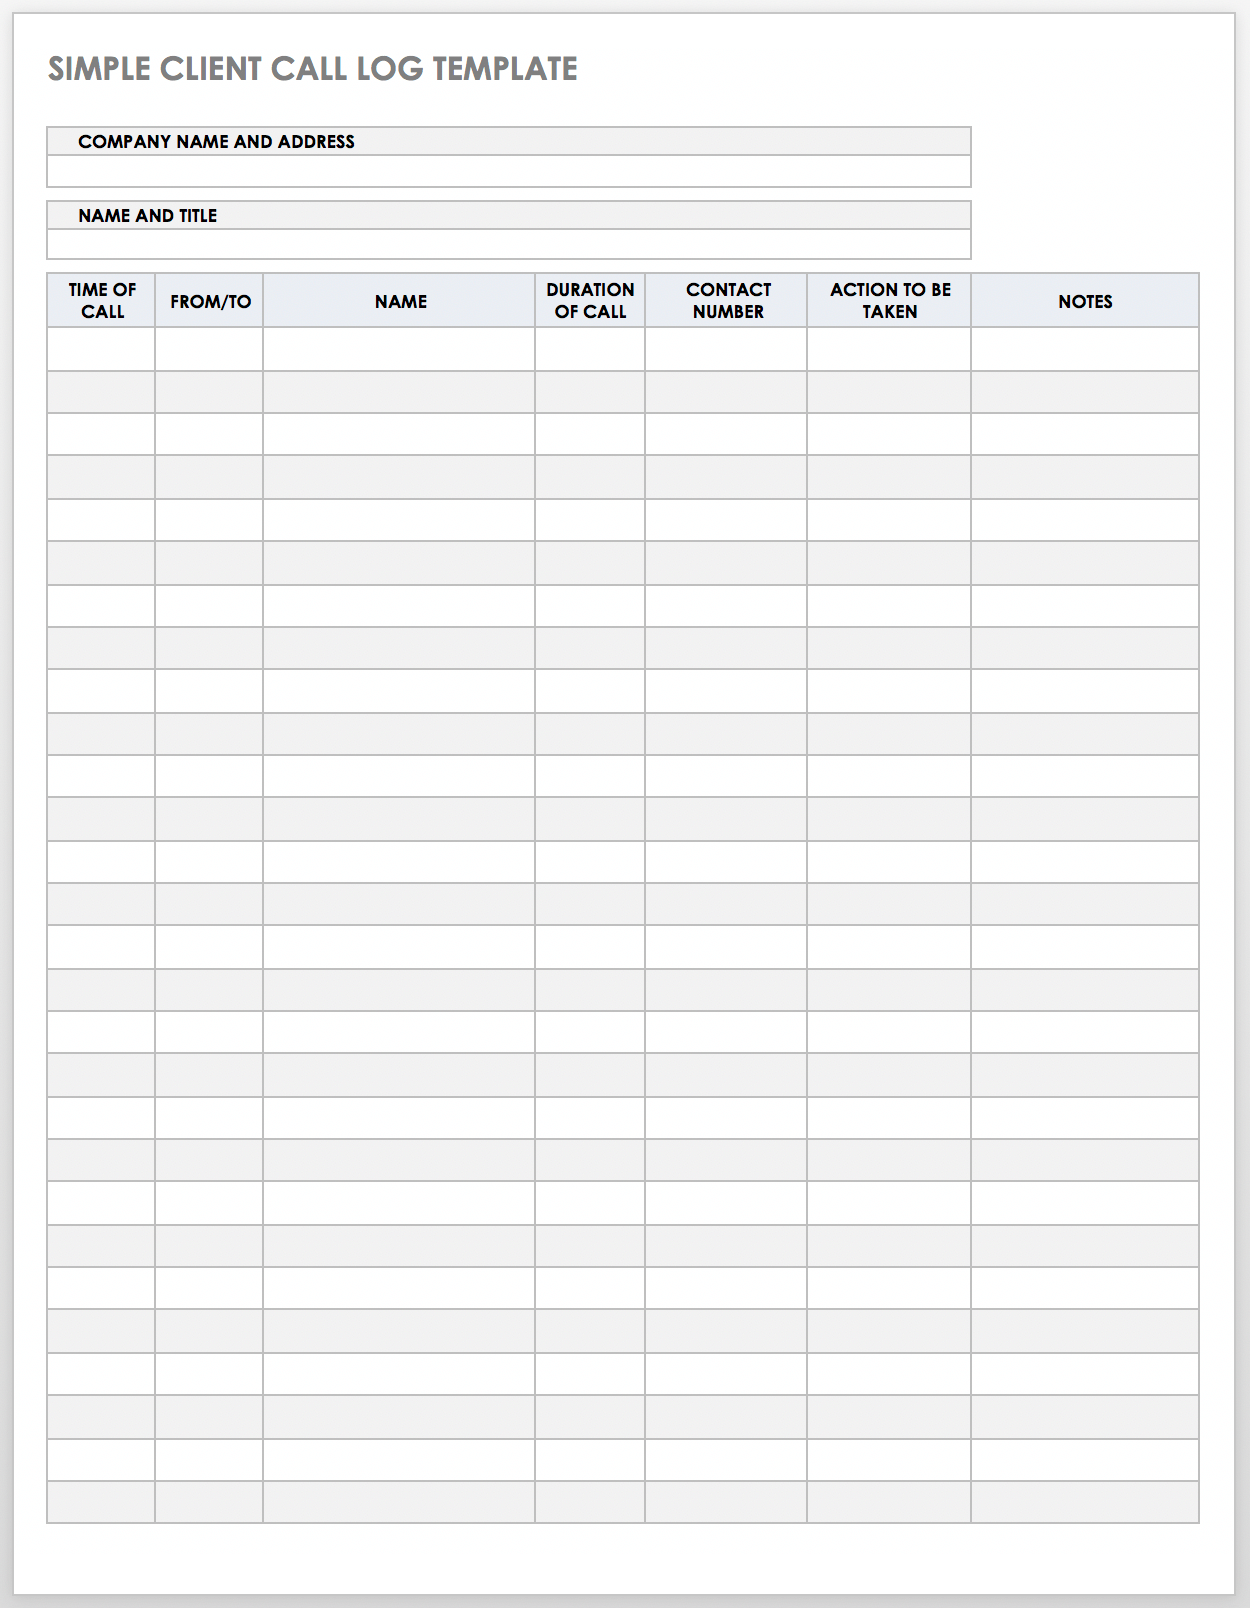 Free Client Call Log Templates  Smartsheet Within Daily Sales Call Report Template Free Download